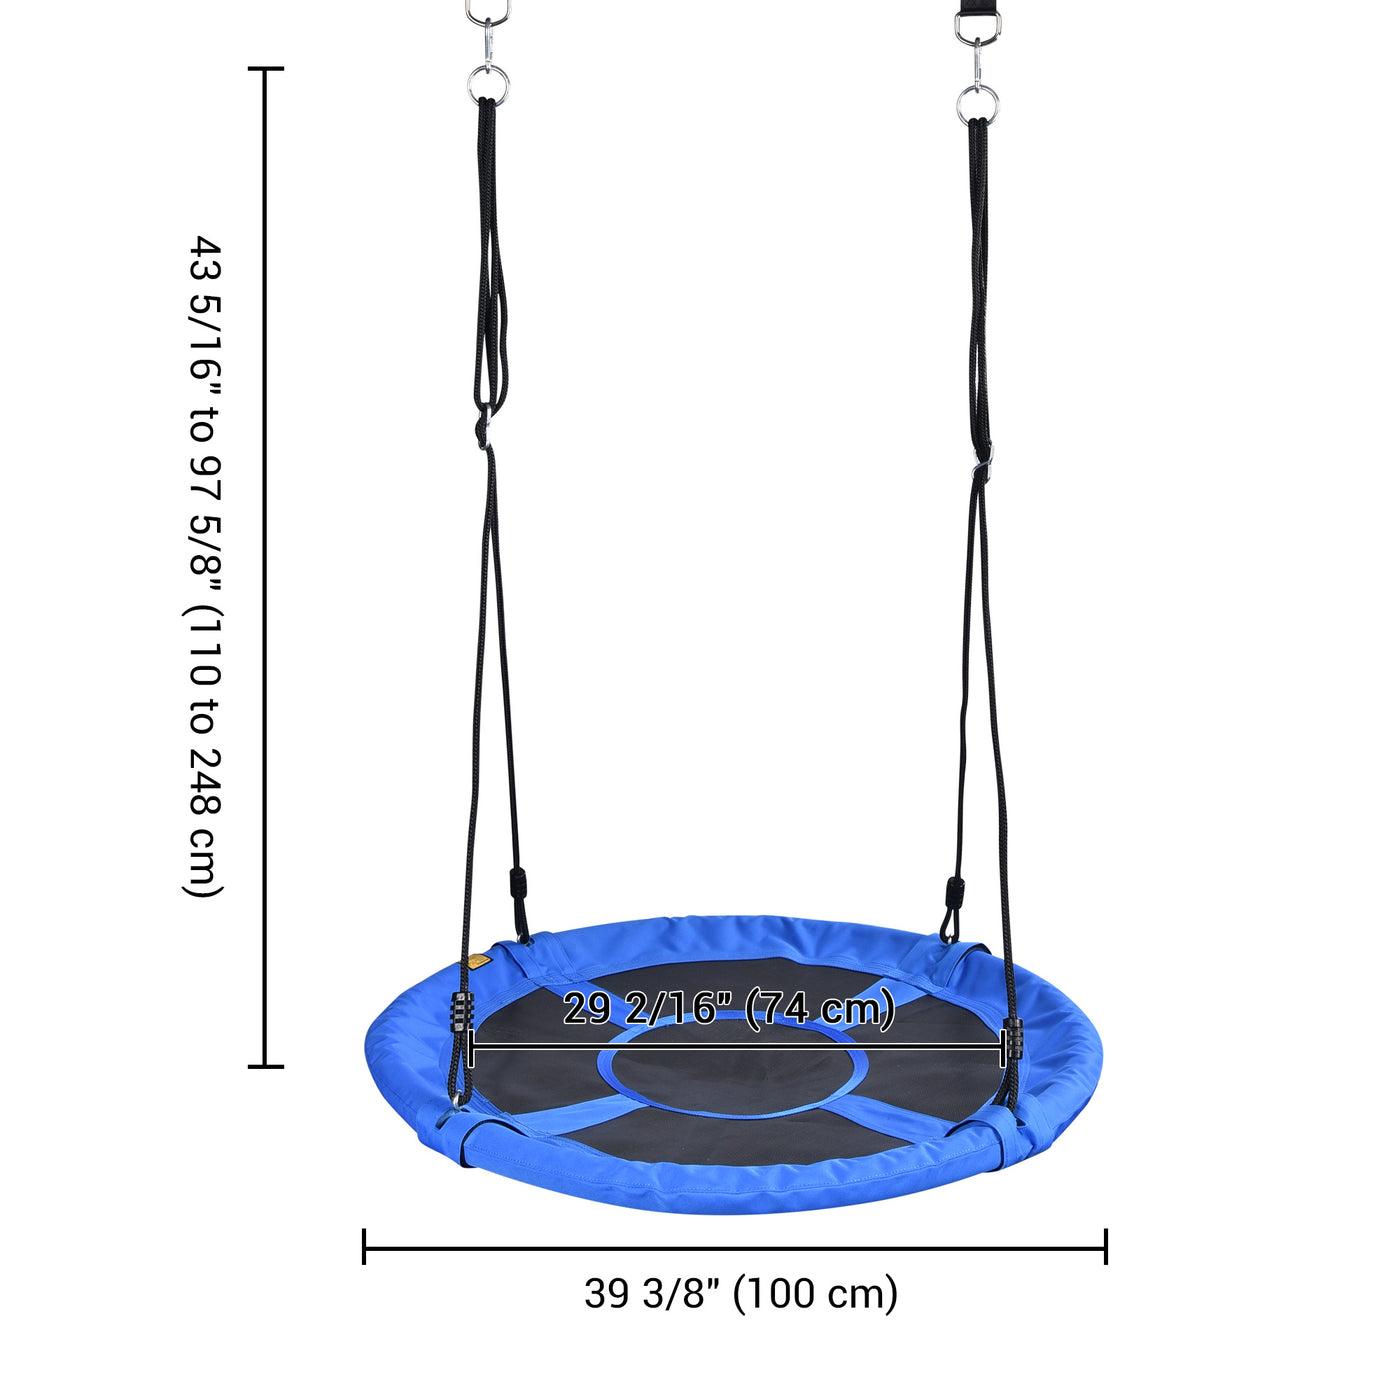 40" Blue Flying Saucer Outdoor Swing for Kids